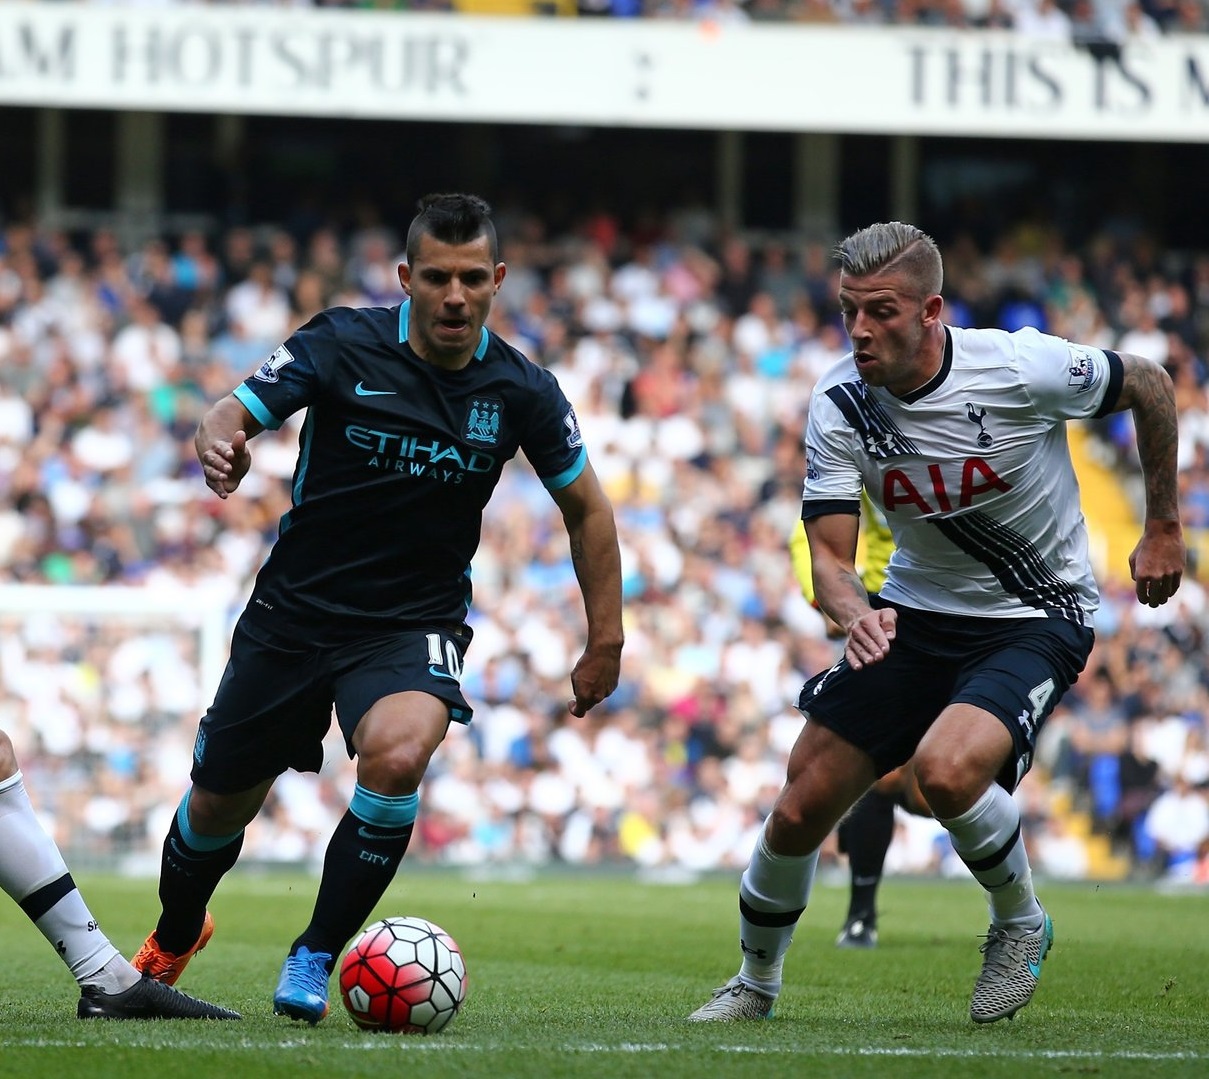 Manchester City's Argentinian striker Sergio Aguero (2nd R) vies with Tottenham Hotspur's Belgian defender Toby Alderweireld (R) and Tottenham Hotspur's English defender Eric Dier (L) the English Premier League football match between Tottenham Hotspur and Manchester City at White Hart Lane in north London on September 26, 2015. AFP PHOTO / JUSTIN TALLIS RESTRICTED TO EDITORIAL USE. No use with unauthorized audio, video, data, fixture lists, club/league logos or 'live' services. Online in-match use limited to 75 images, no video emulation. No use in betting, games or single club/league/player publications. (Photo credit should read JUSTIN TALLIS/AFP/Getty Images)